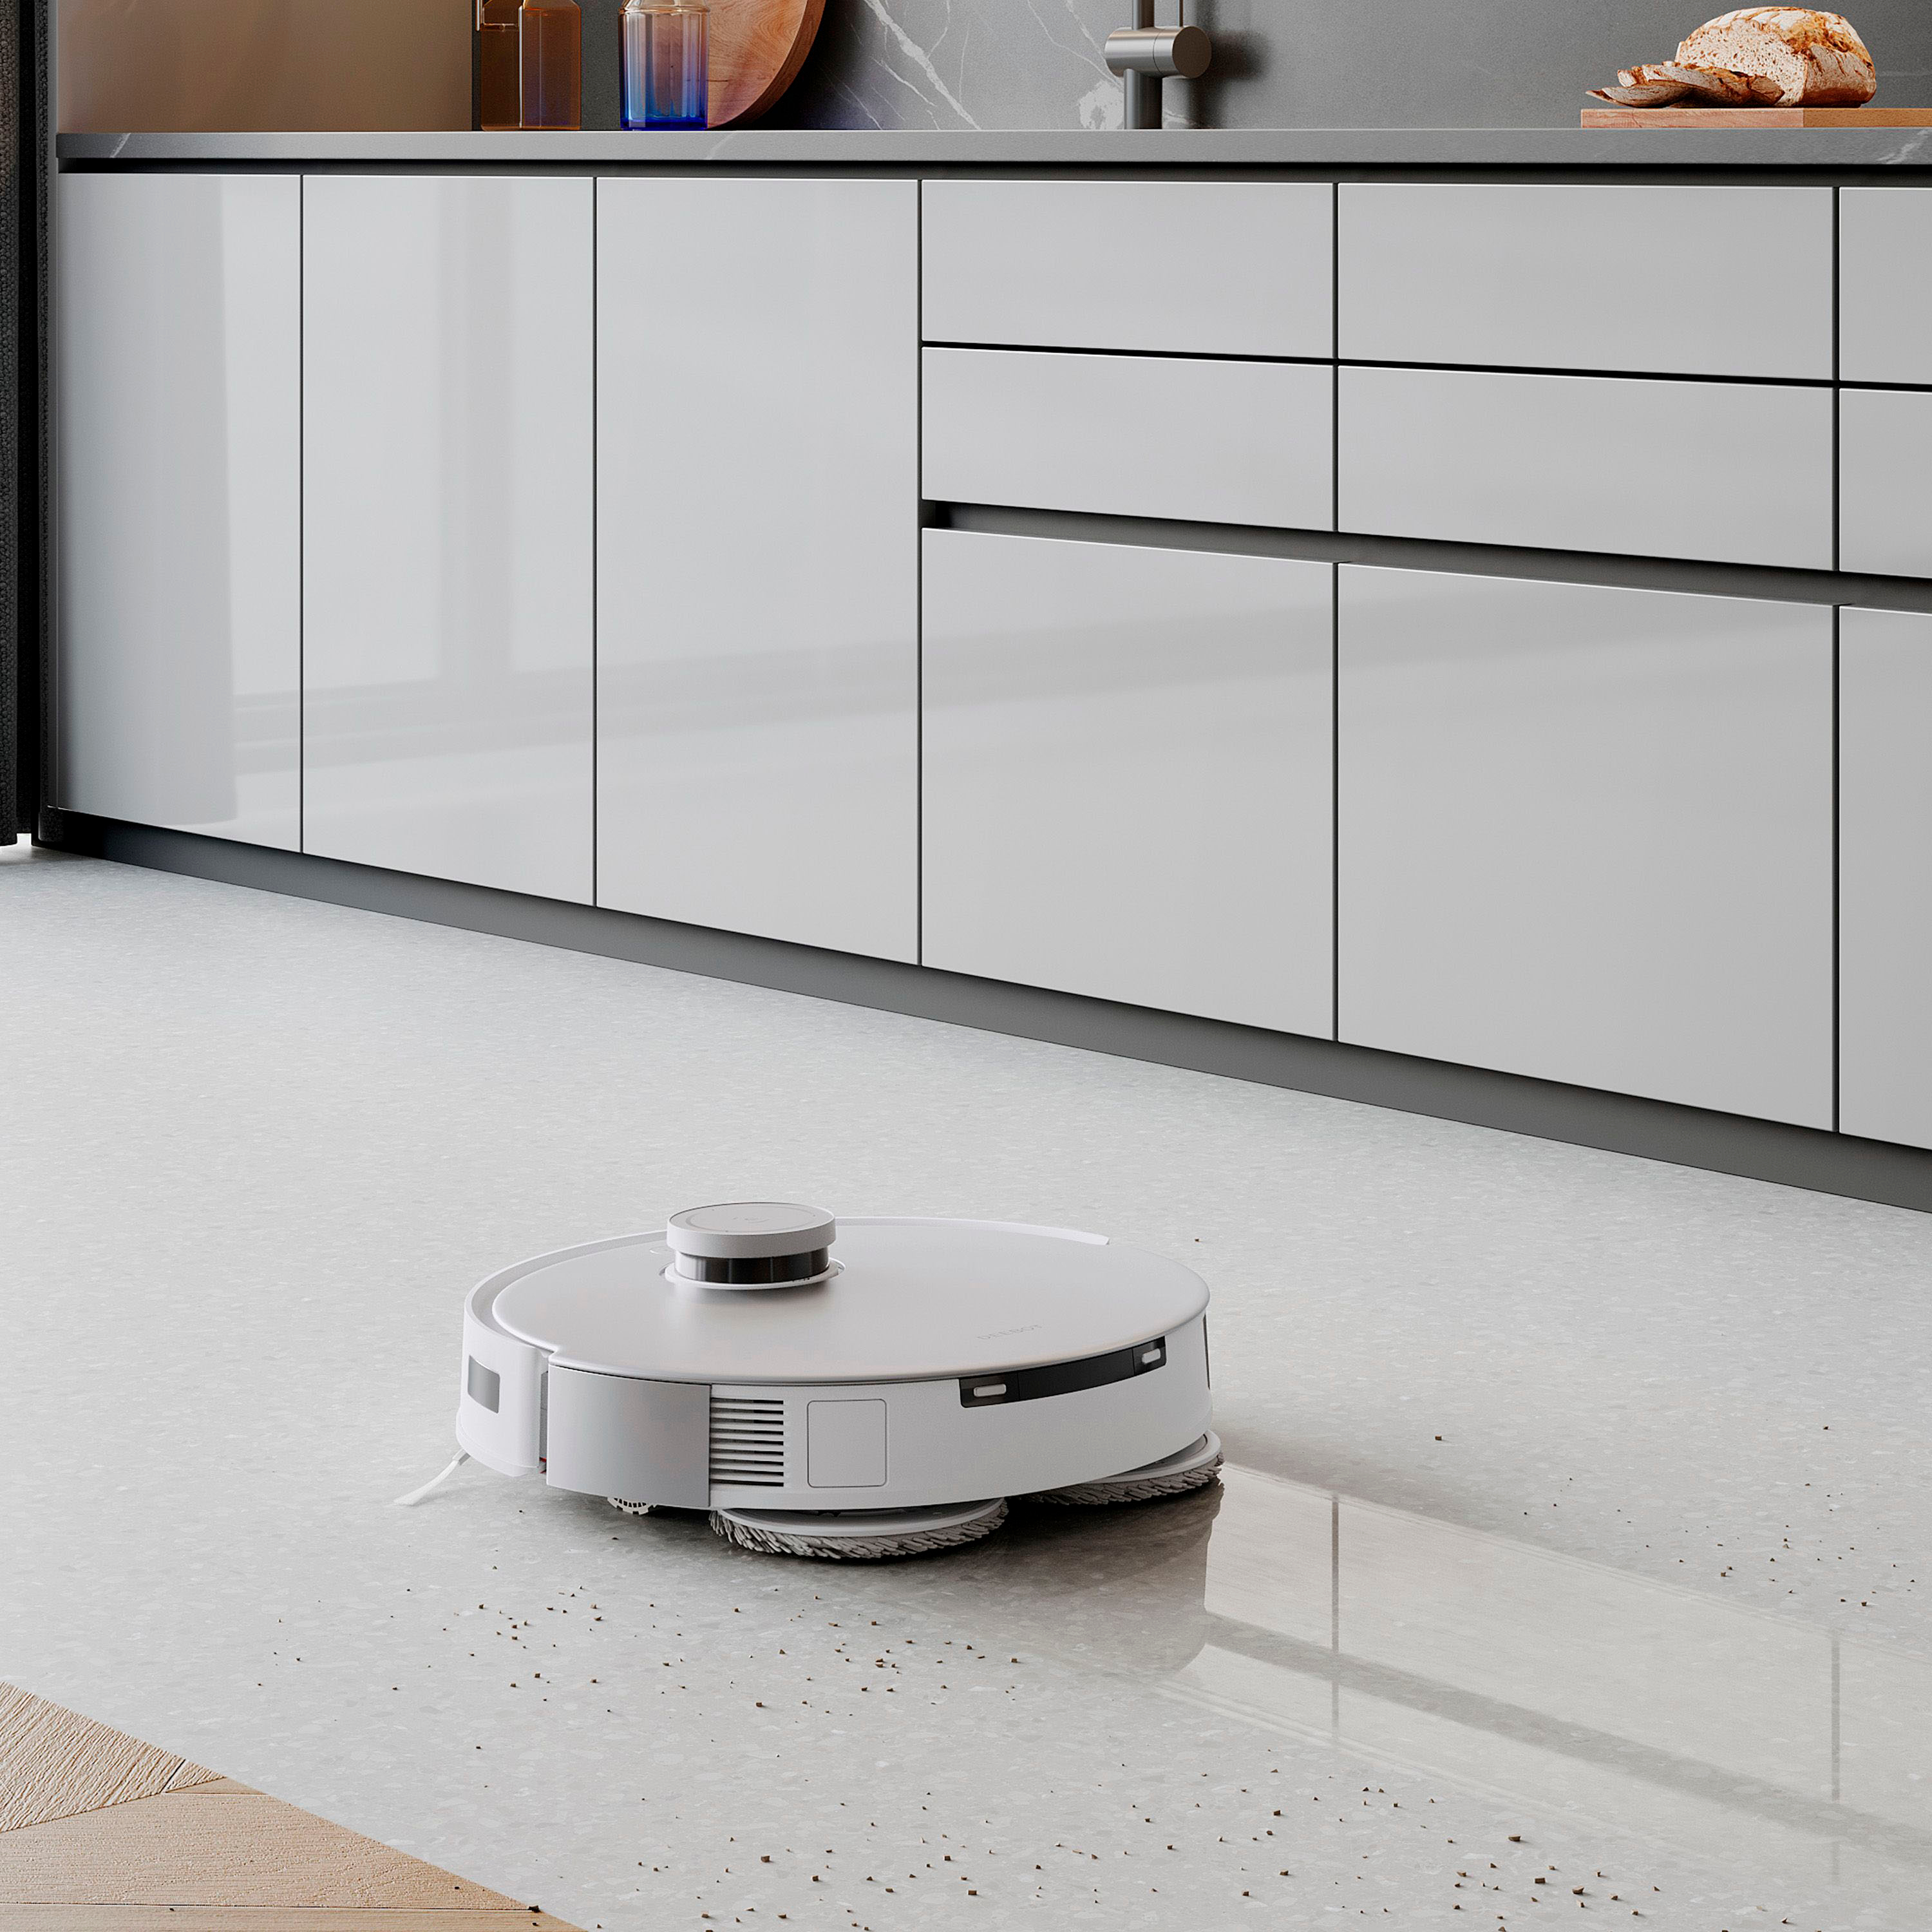 Best Station Buy WHITE DEEBOT Washing Robotics with - Connected OZMOT20M T20 & Vacuum OMNI Mop Self Empty Auto Wi-Fi Robot ECOVACS